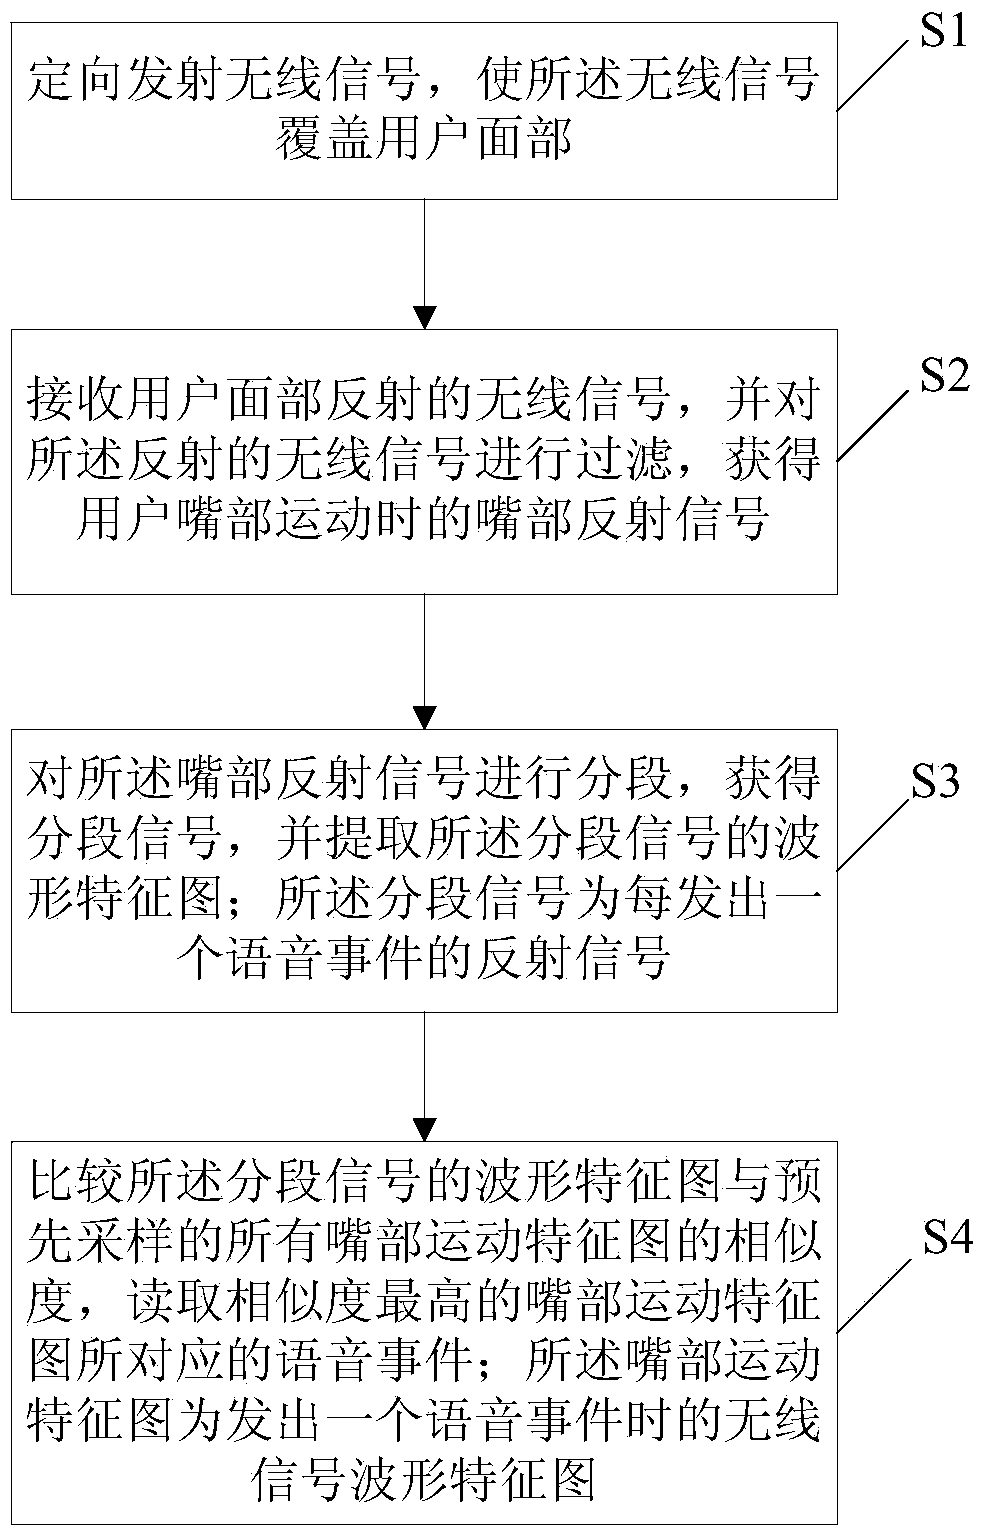 Lip language recognition method and system